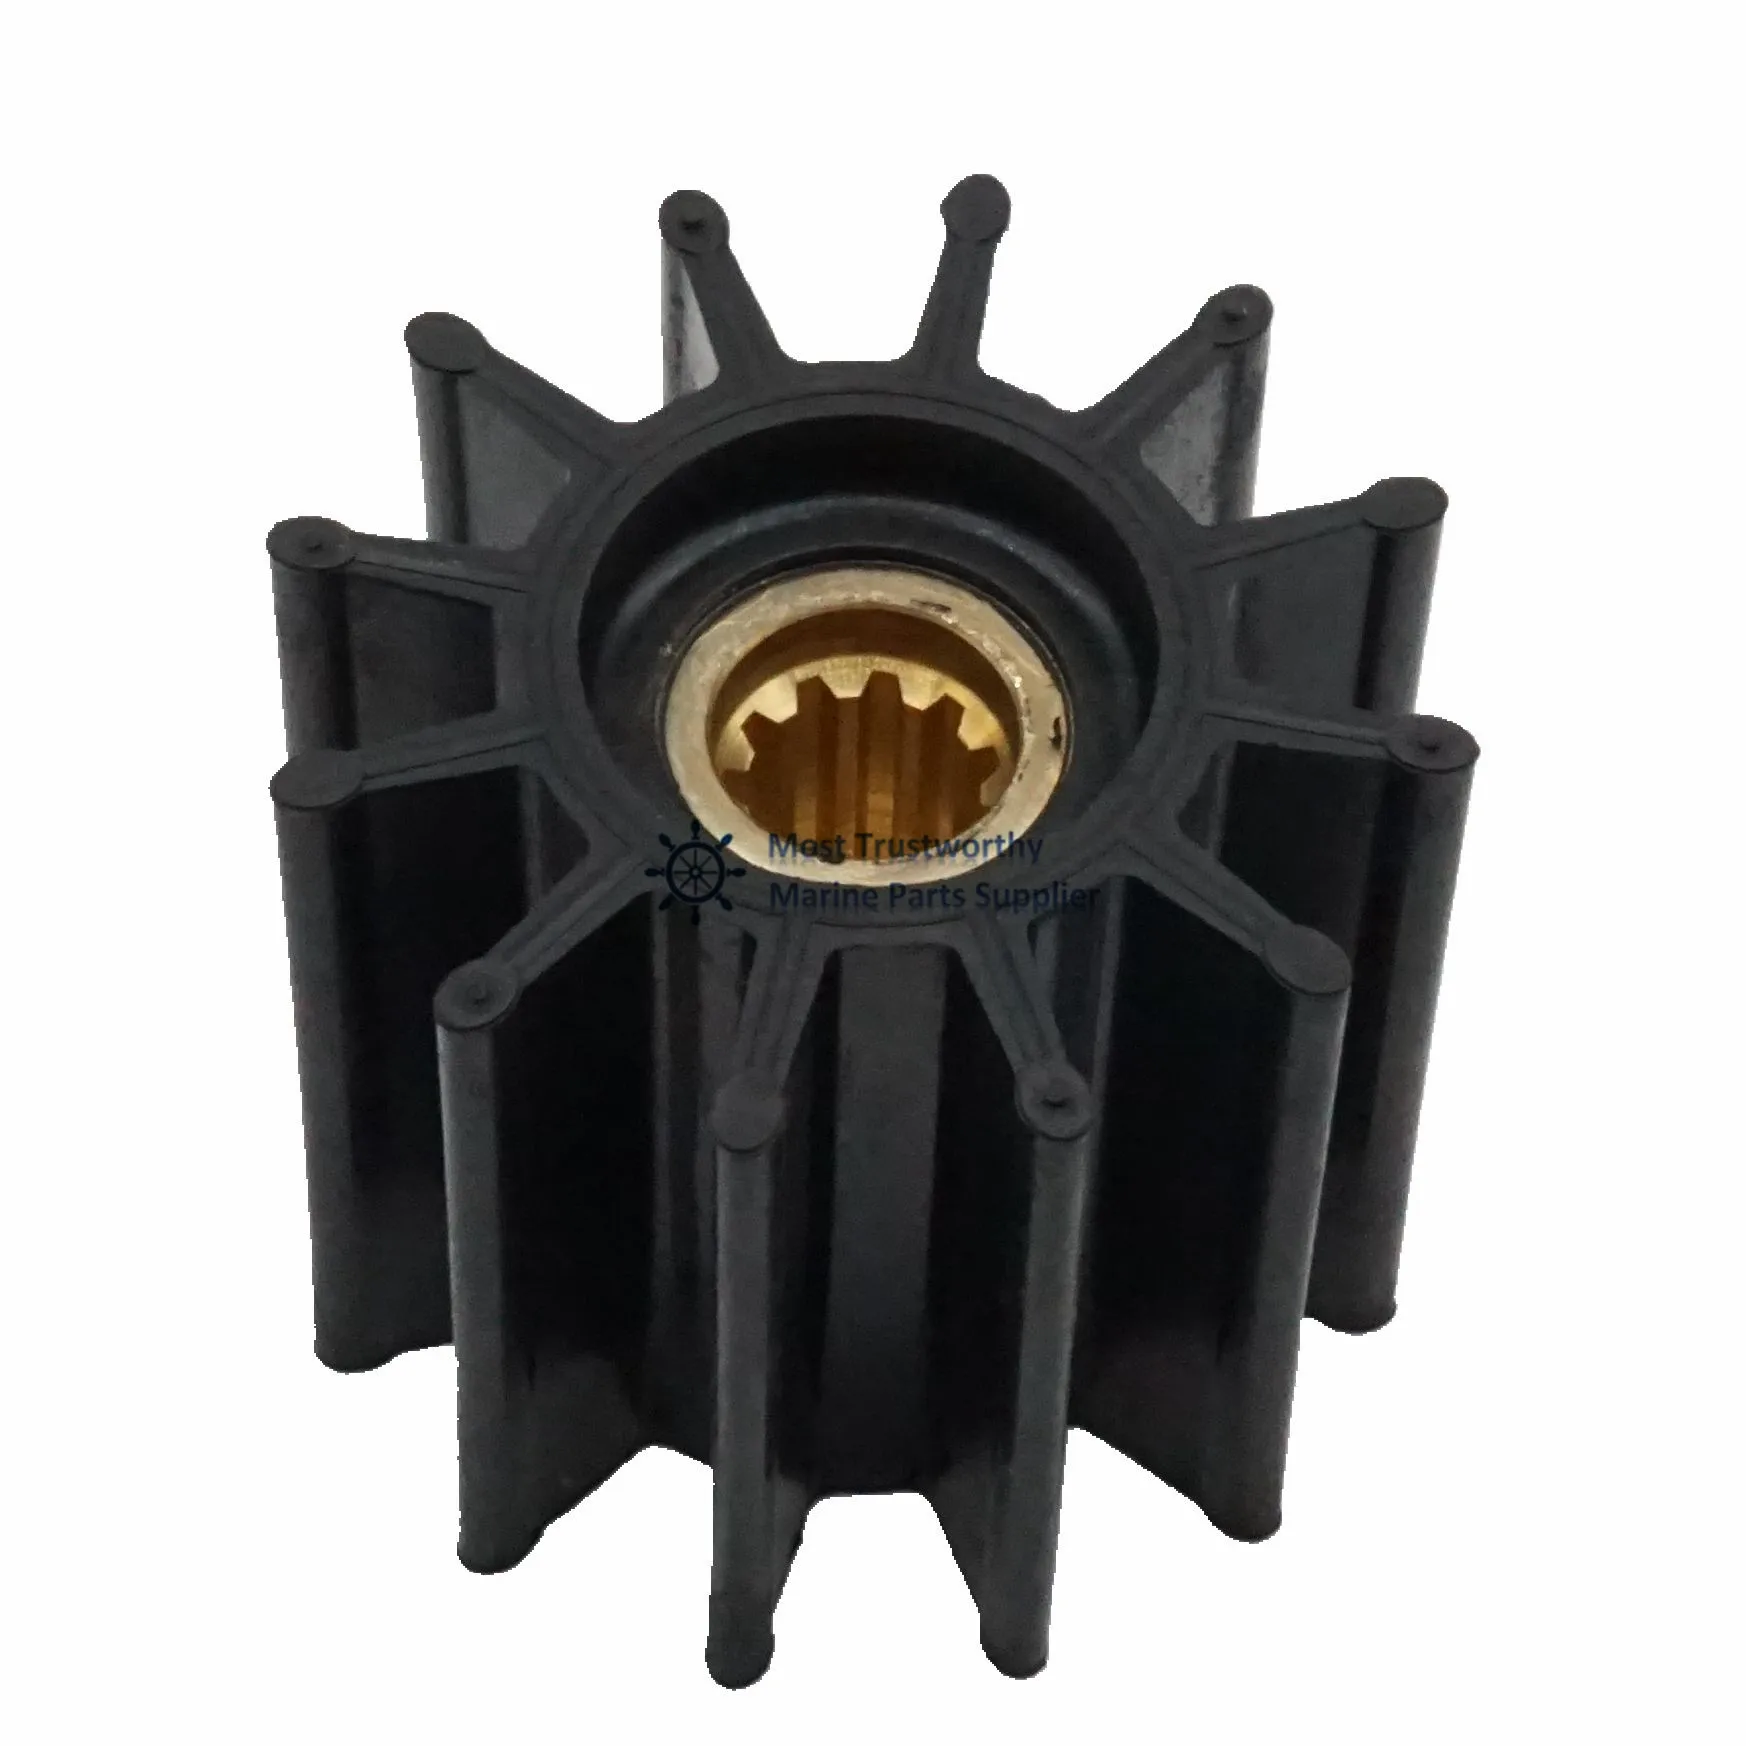 Xinrong Water Pump Flexible Rubber Impeller Replace Sherwood Impeller 09959K